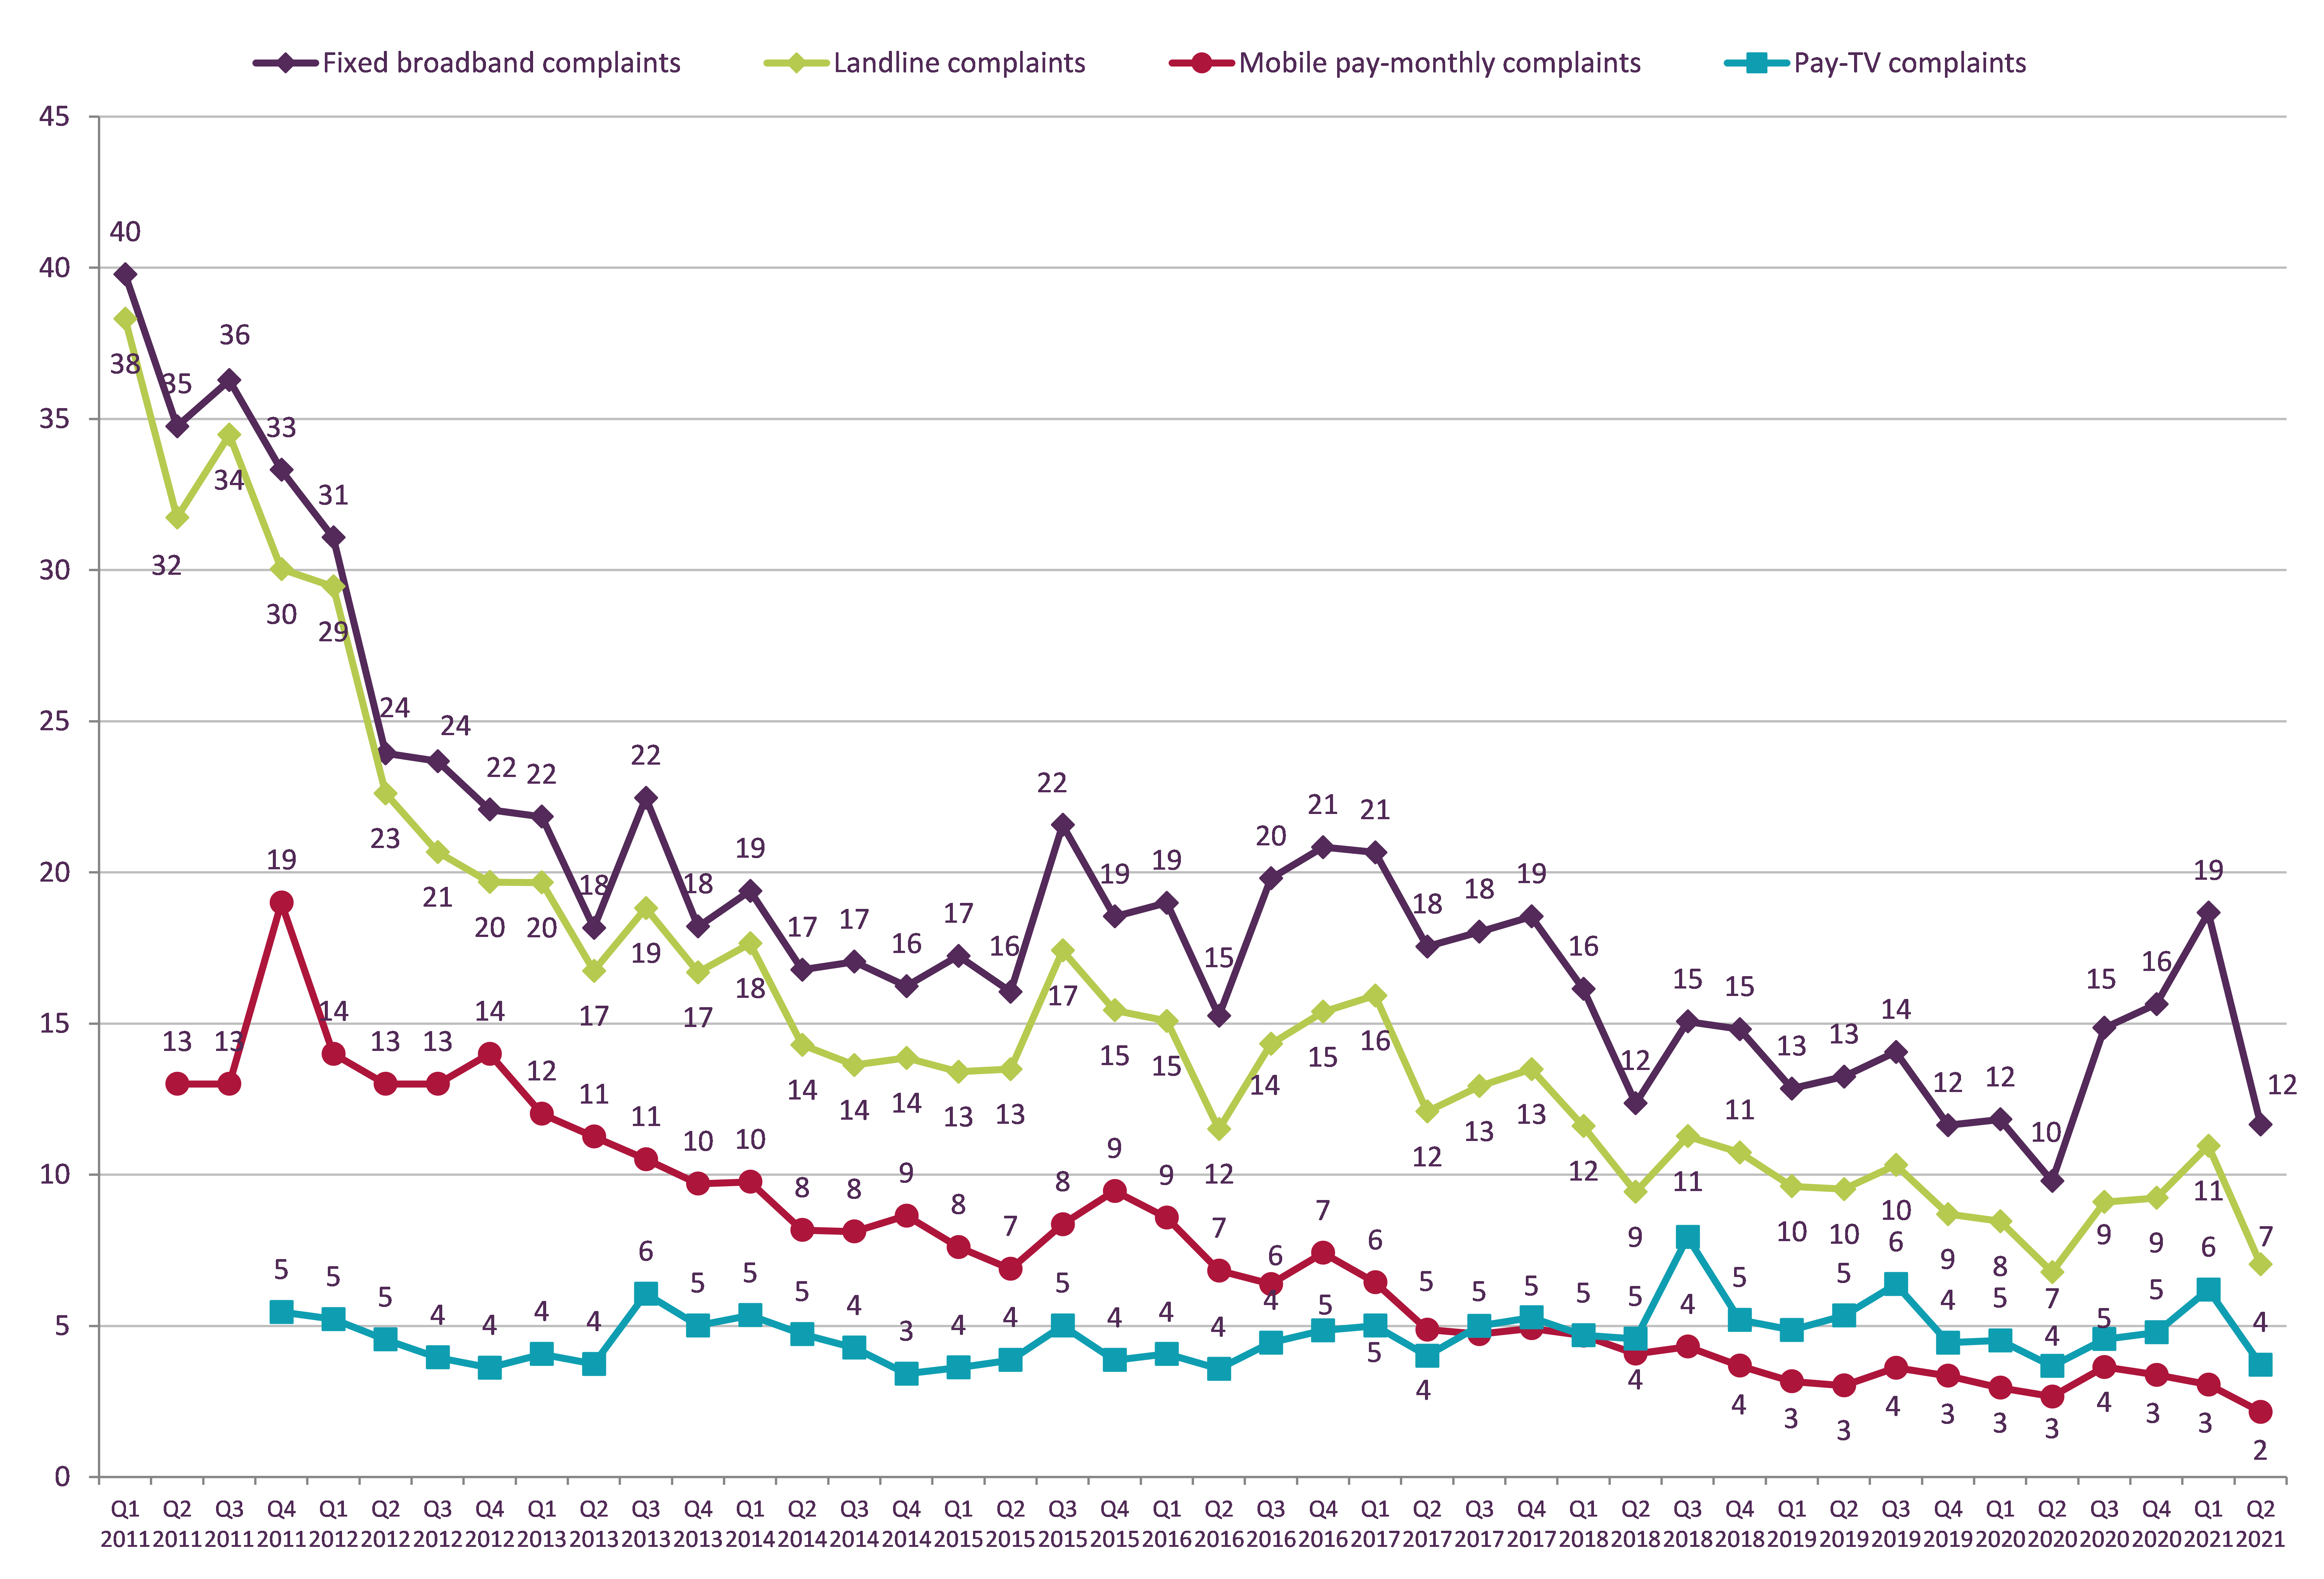 Graph showing trend data on residential consumer complaints received by Ofcom across landline, fixed broadband, pay-monthly mobile and pay TV services, by communications provider. It shows the relative volume of complaints per sector per 100,000 subscribers for the Q1 2011 – Q2 2021 period. The relative volume of complaints per 100,000 subscribers decreased for fixed broadband from 19 to 12, landline from 11 to 7, pay-monthly mobile from 3 to 2, and pay TV from 6 to 4. 